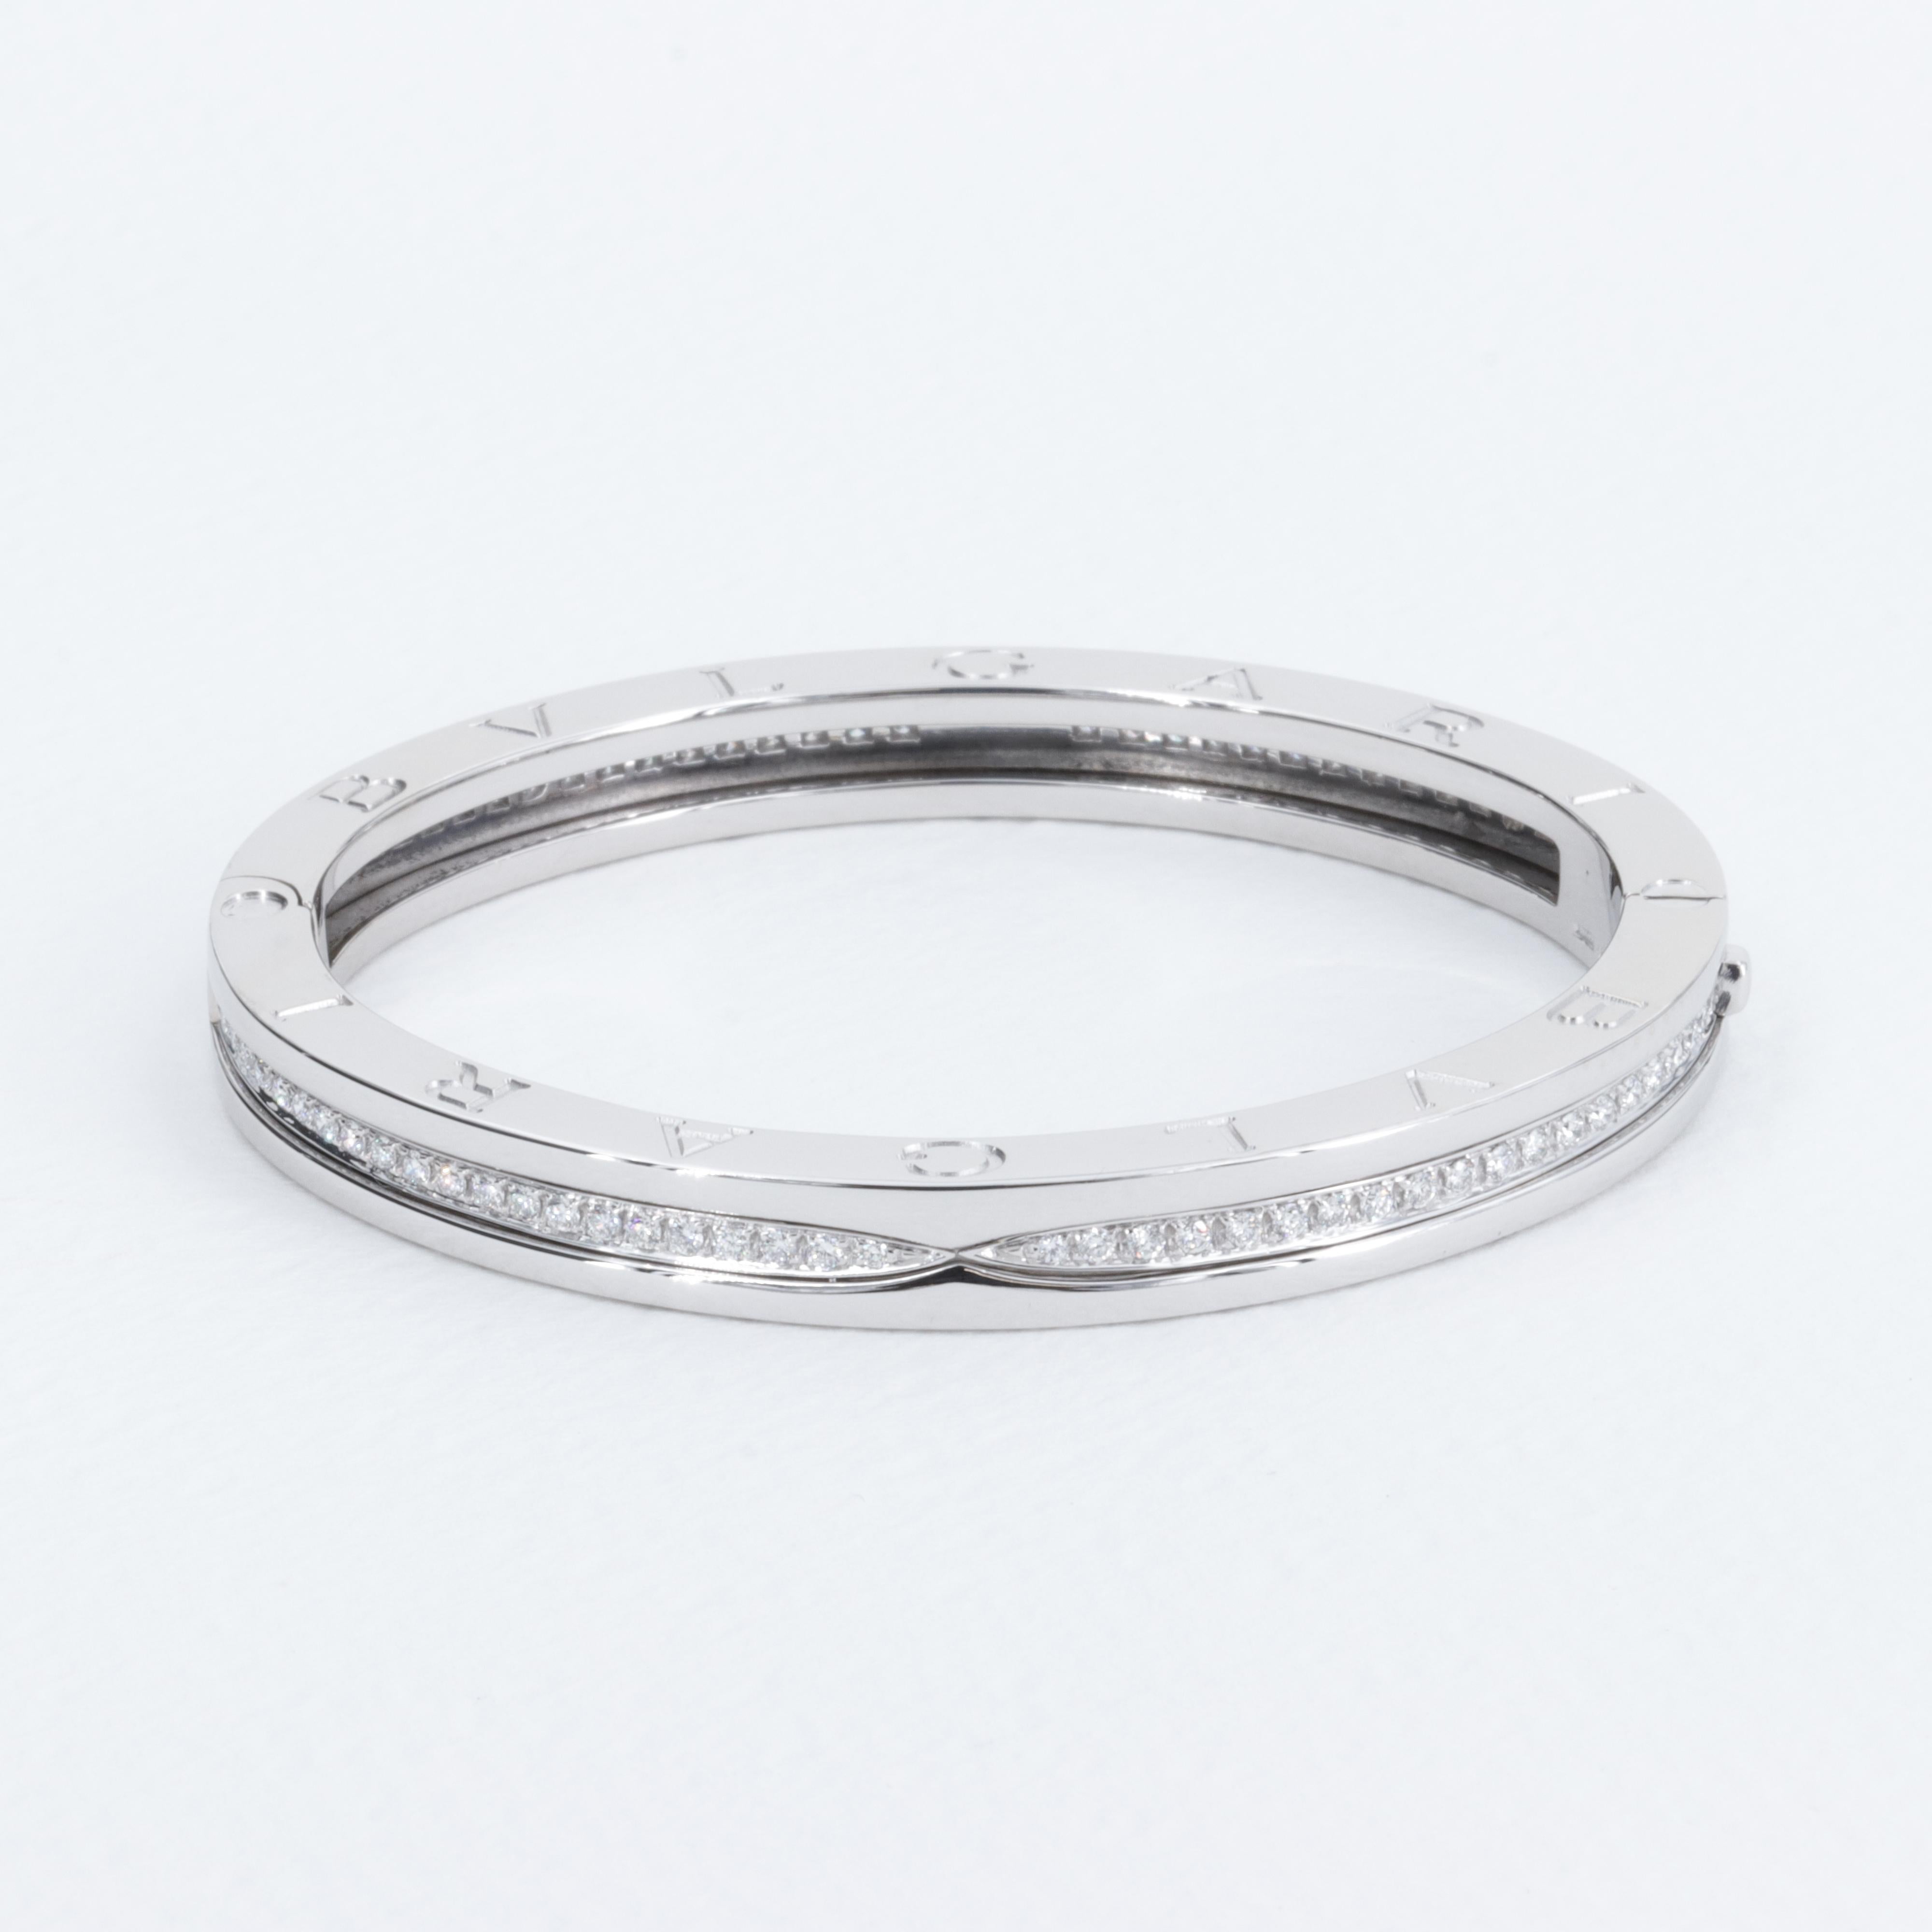 An iconic design by Bvlgari, the Bzero.1 Bangle Bracelet draws its design inspiration from the Colosseum and is an ode to the famous jewelry design houses Italian heritage. Expertly set with round brilliant cut diamonds this bracelet is a fantastic